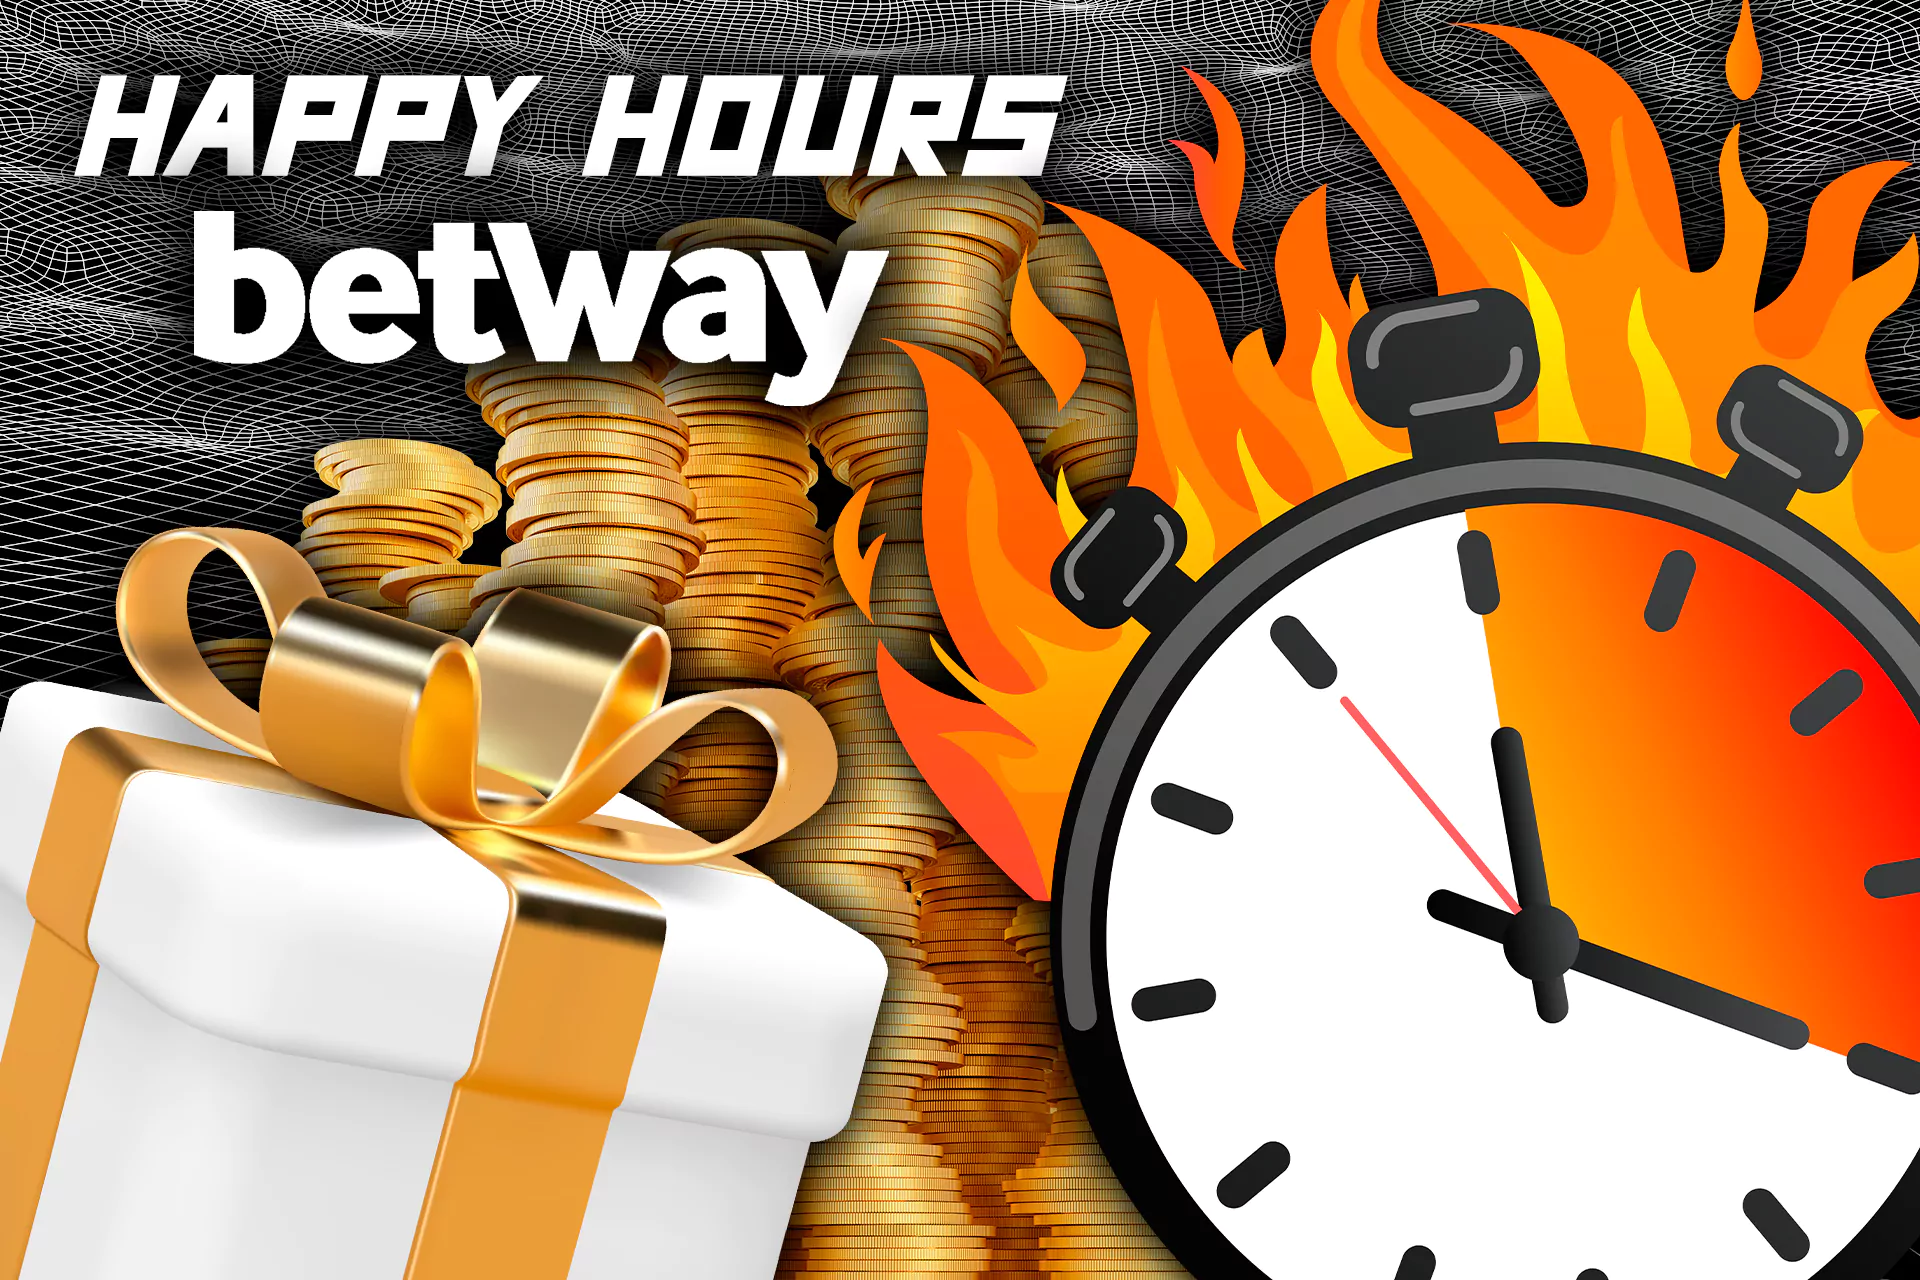 At happy hours, you can get extra points for every 1000 INR you spend to bet.